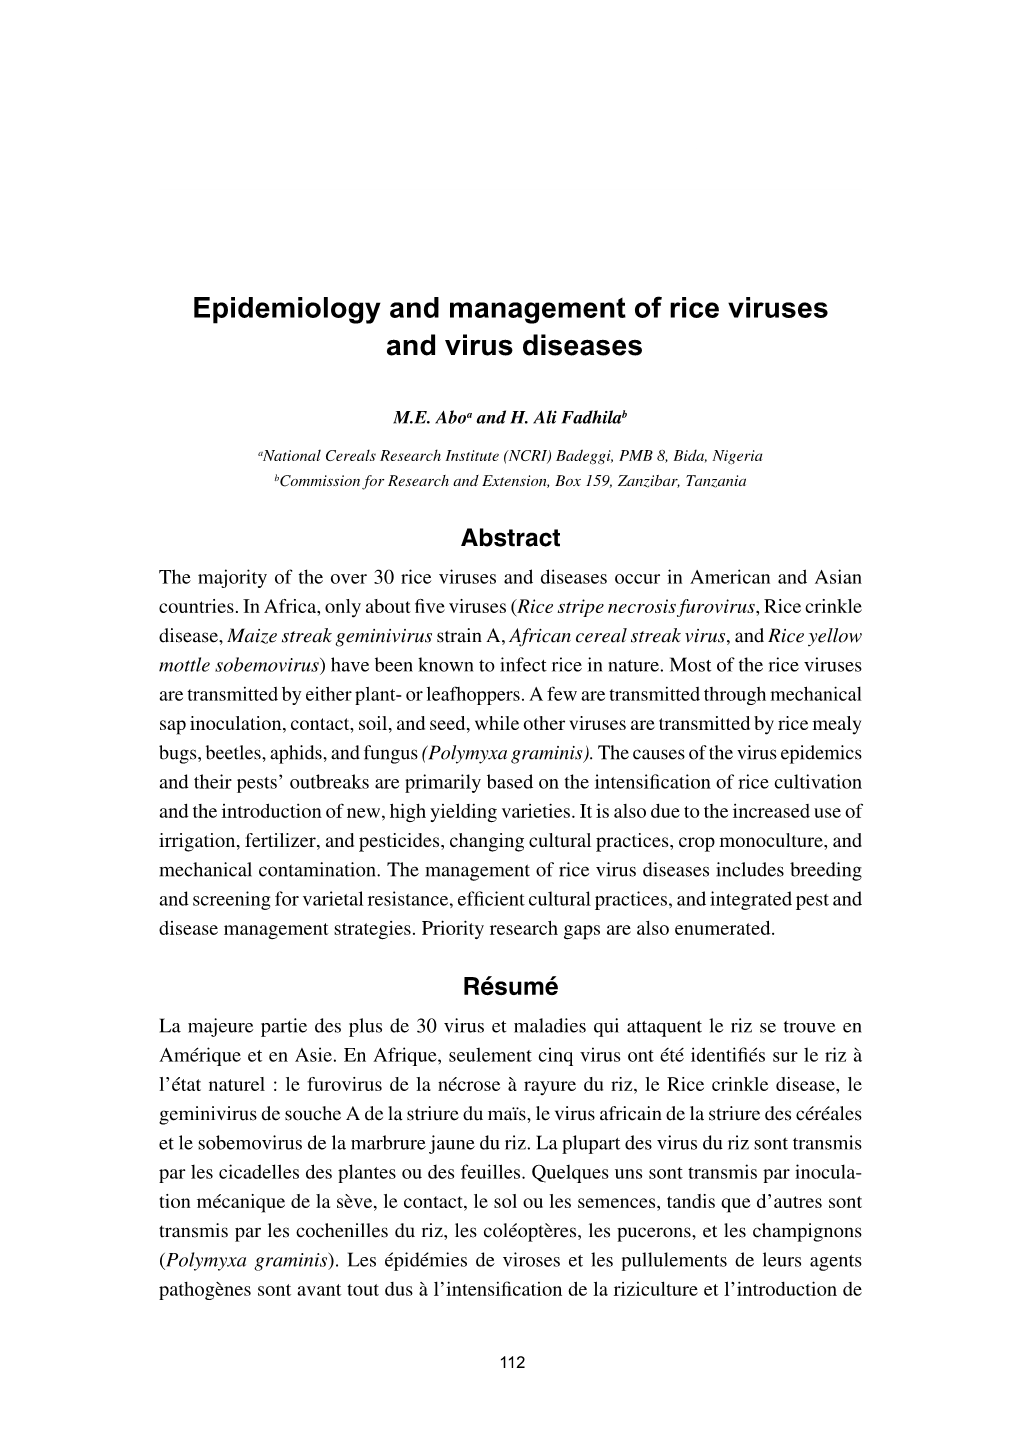 Epidemiology and Management of Rice Viruses and Virus Diseases